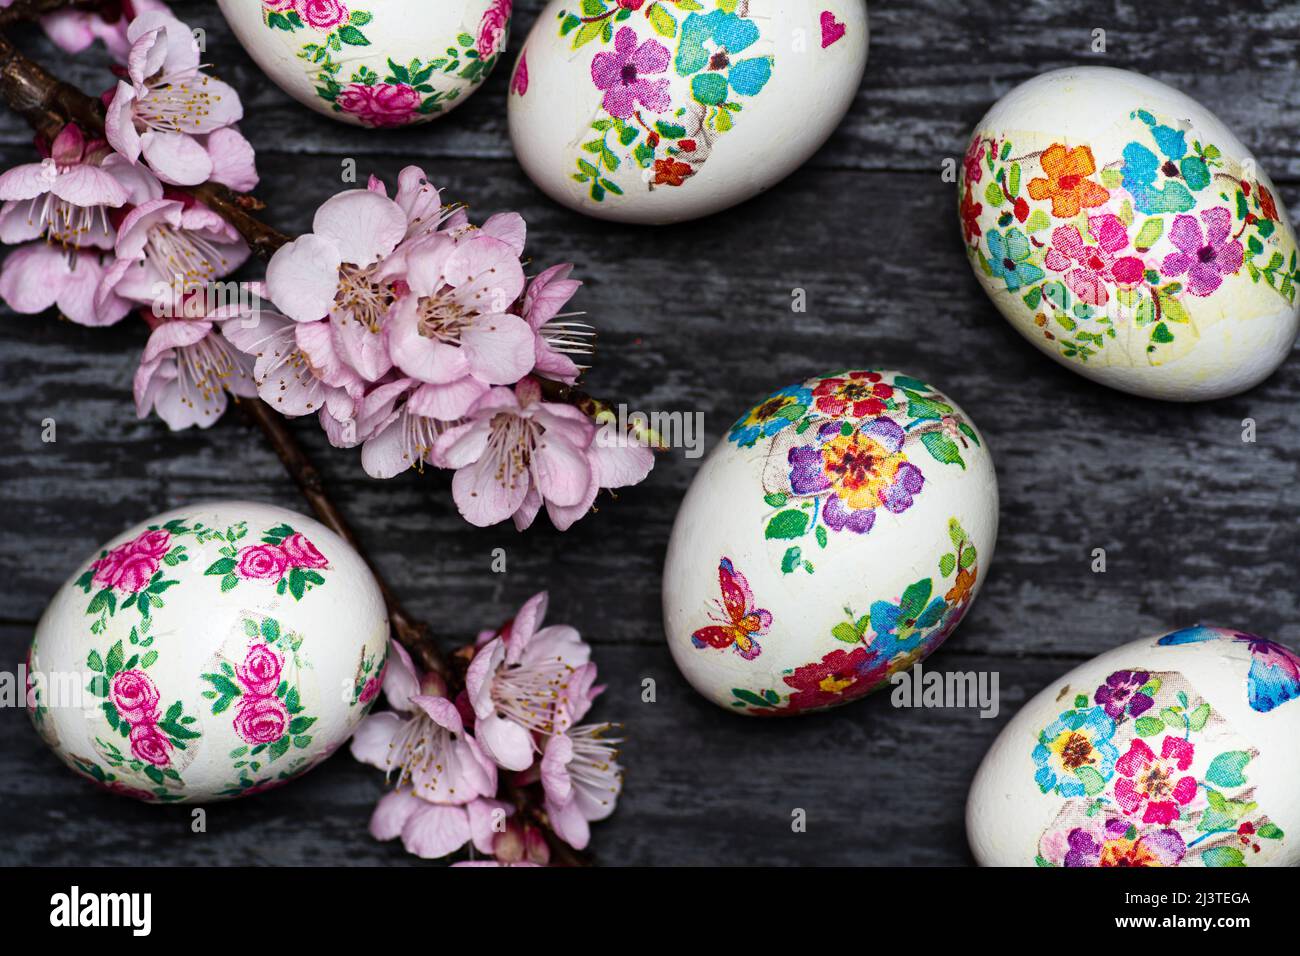 White Easter eggs made with decoupage technique with floral motifs and a flowering branch on a black rustic background. Stock Photo